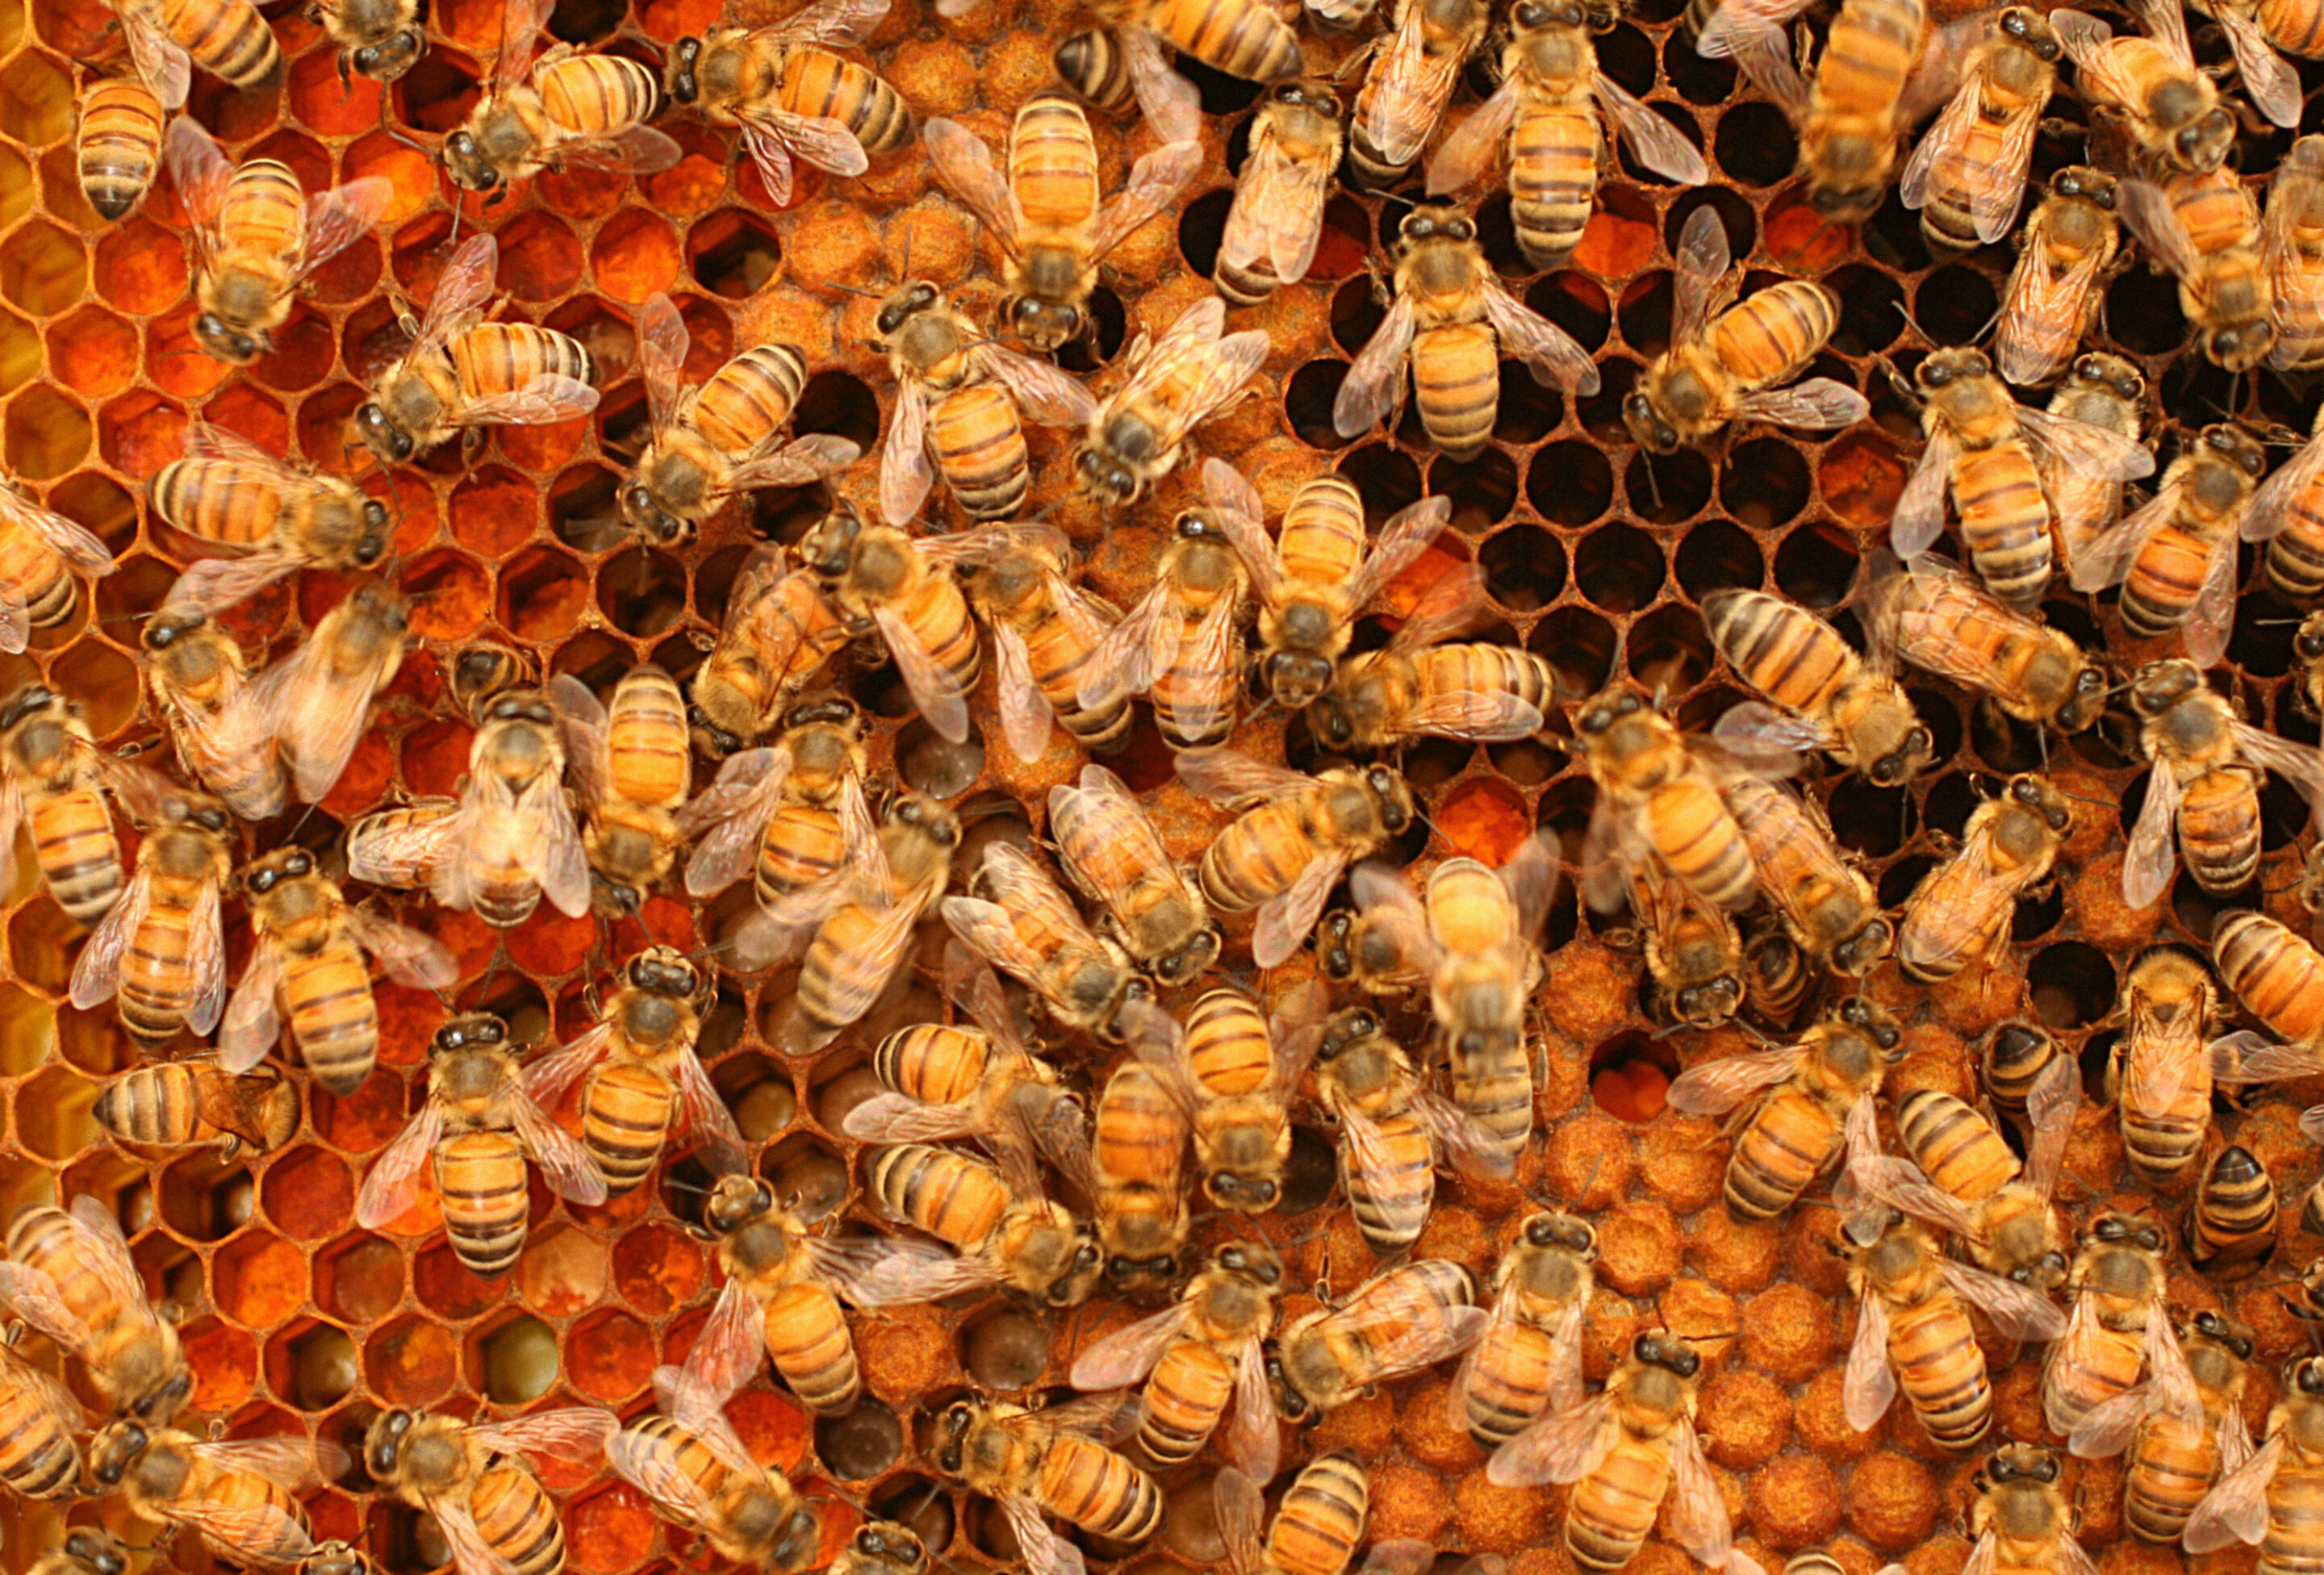 Size matters for bee 'superorganism' colonies